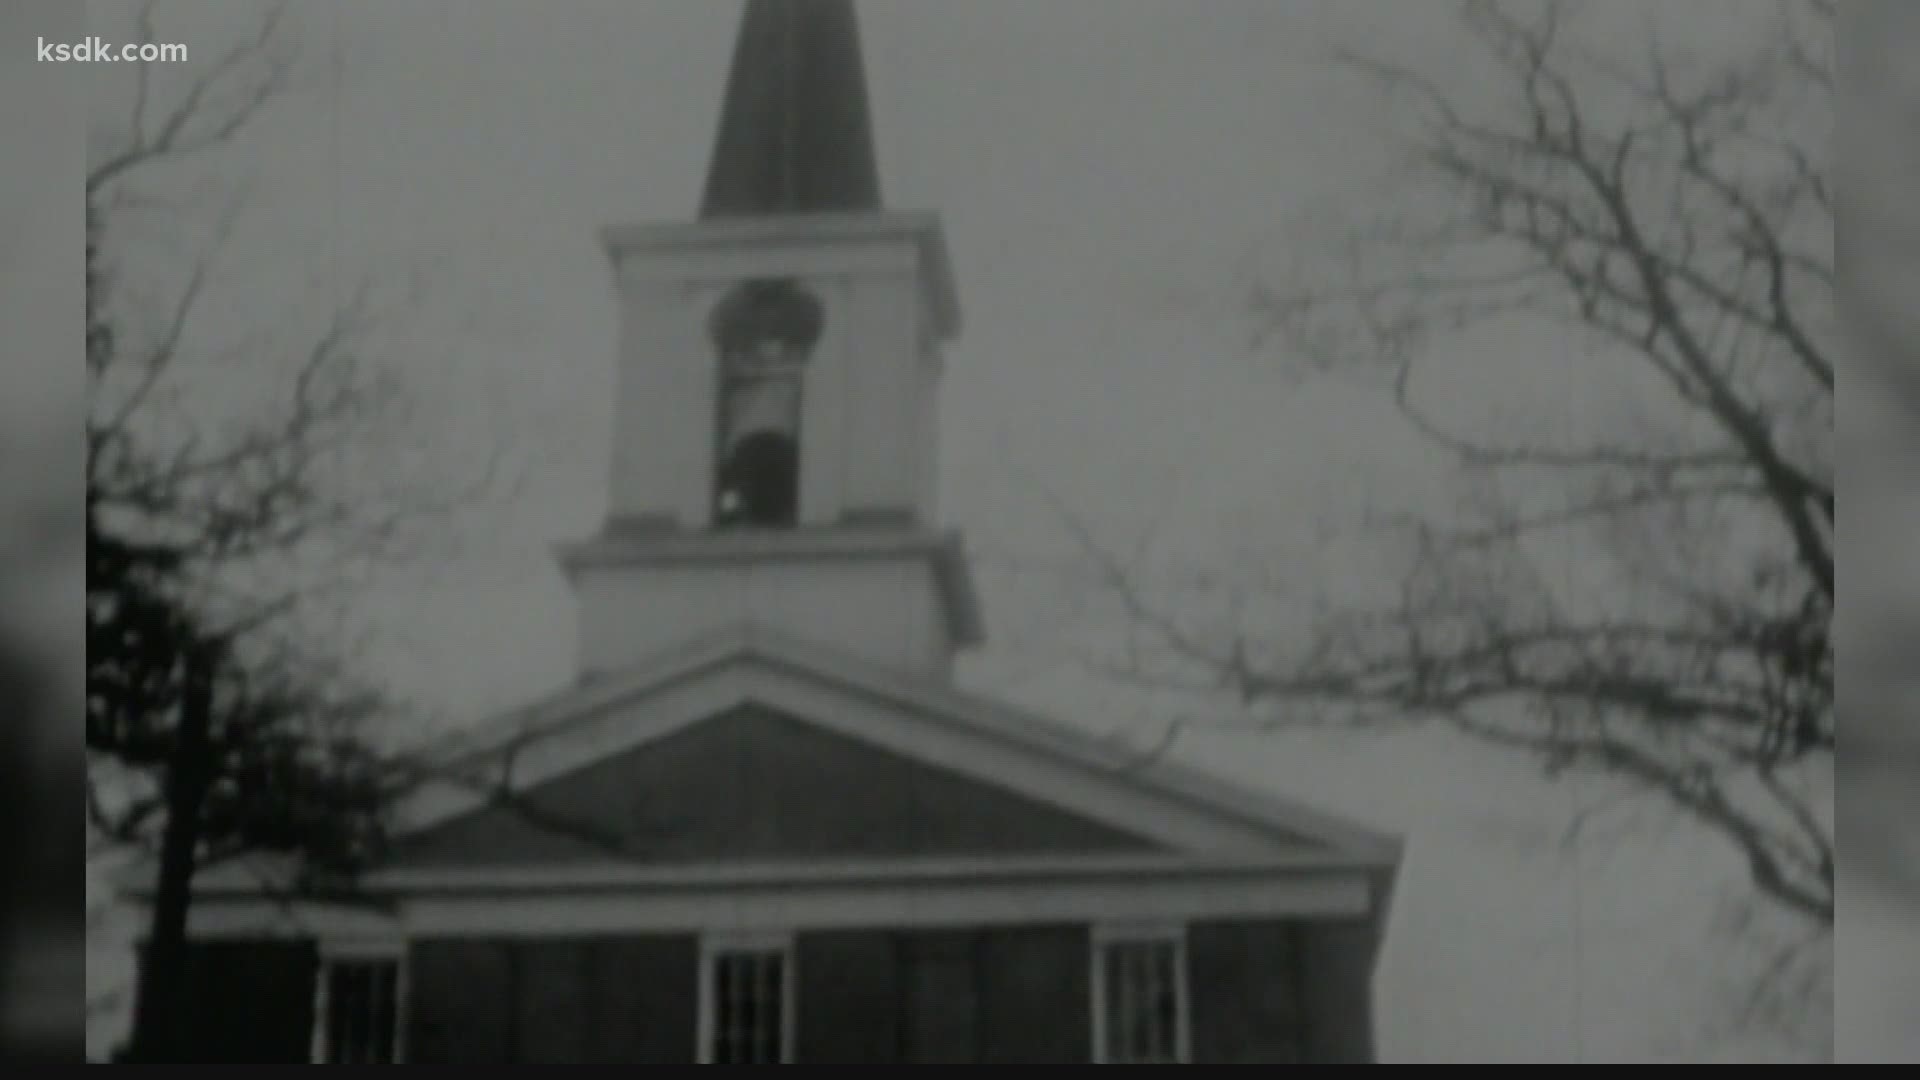 Located on the campus of what was then known as McKendree College, the chapel was 100 years old and no longer safe